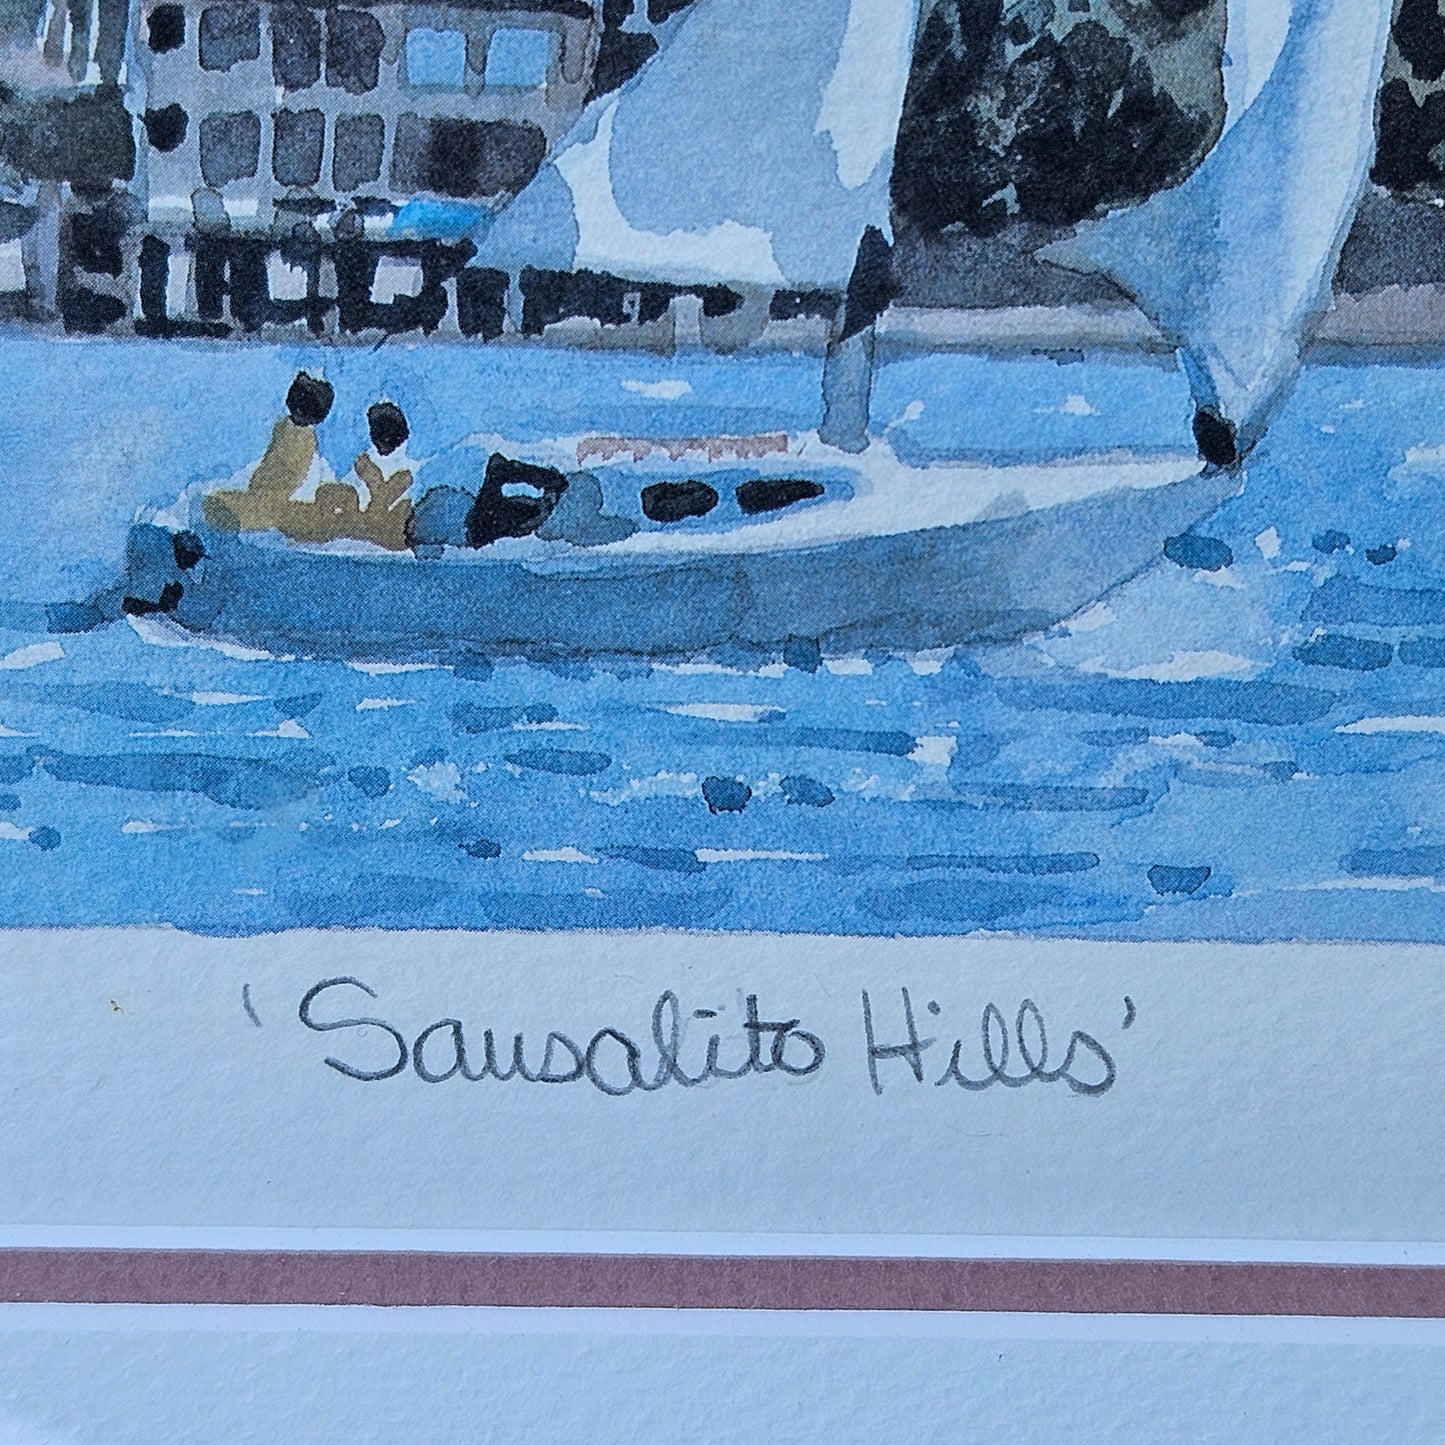 Joe Jaqua Signed Limited Edition Lithograph of Sausalito Hills with Sailboat